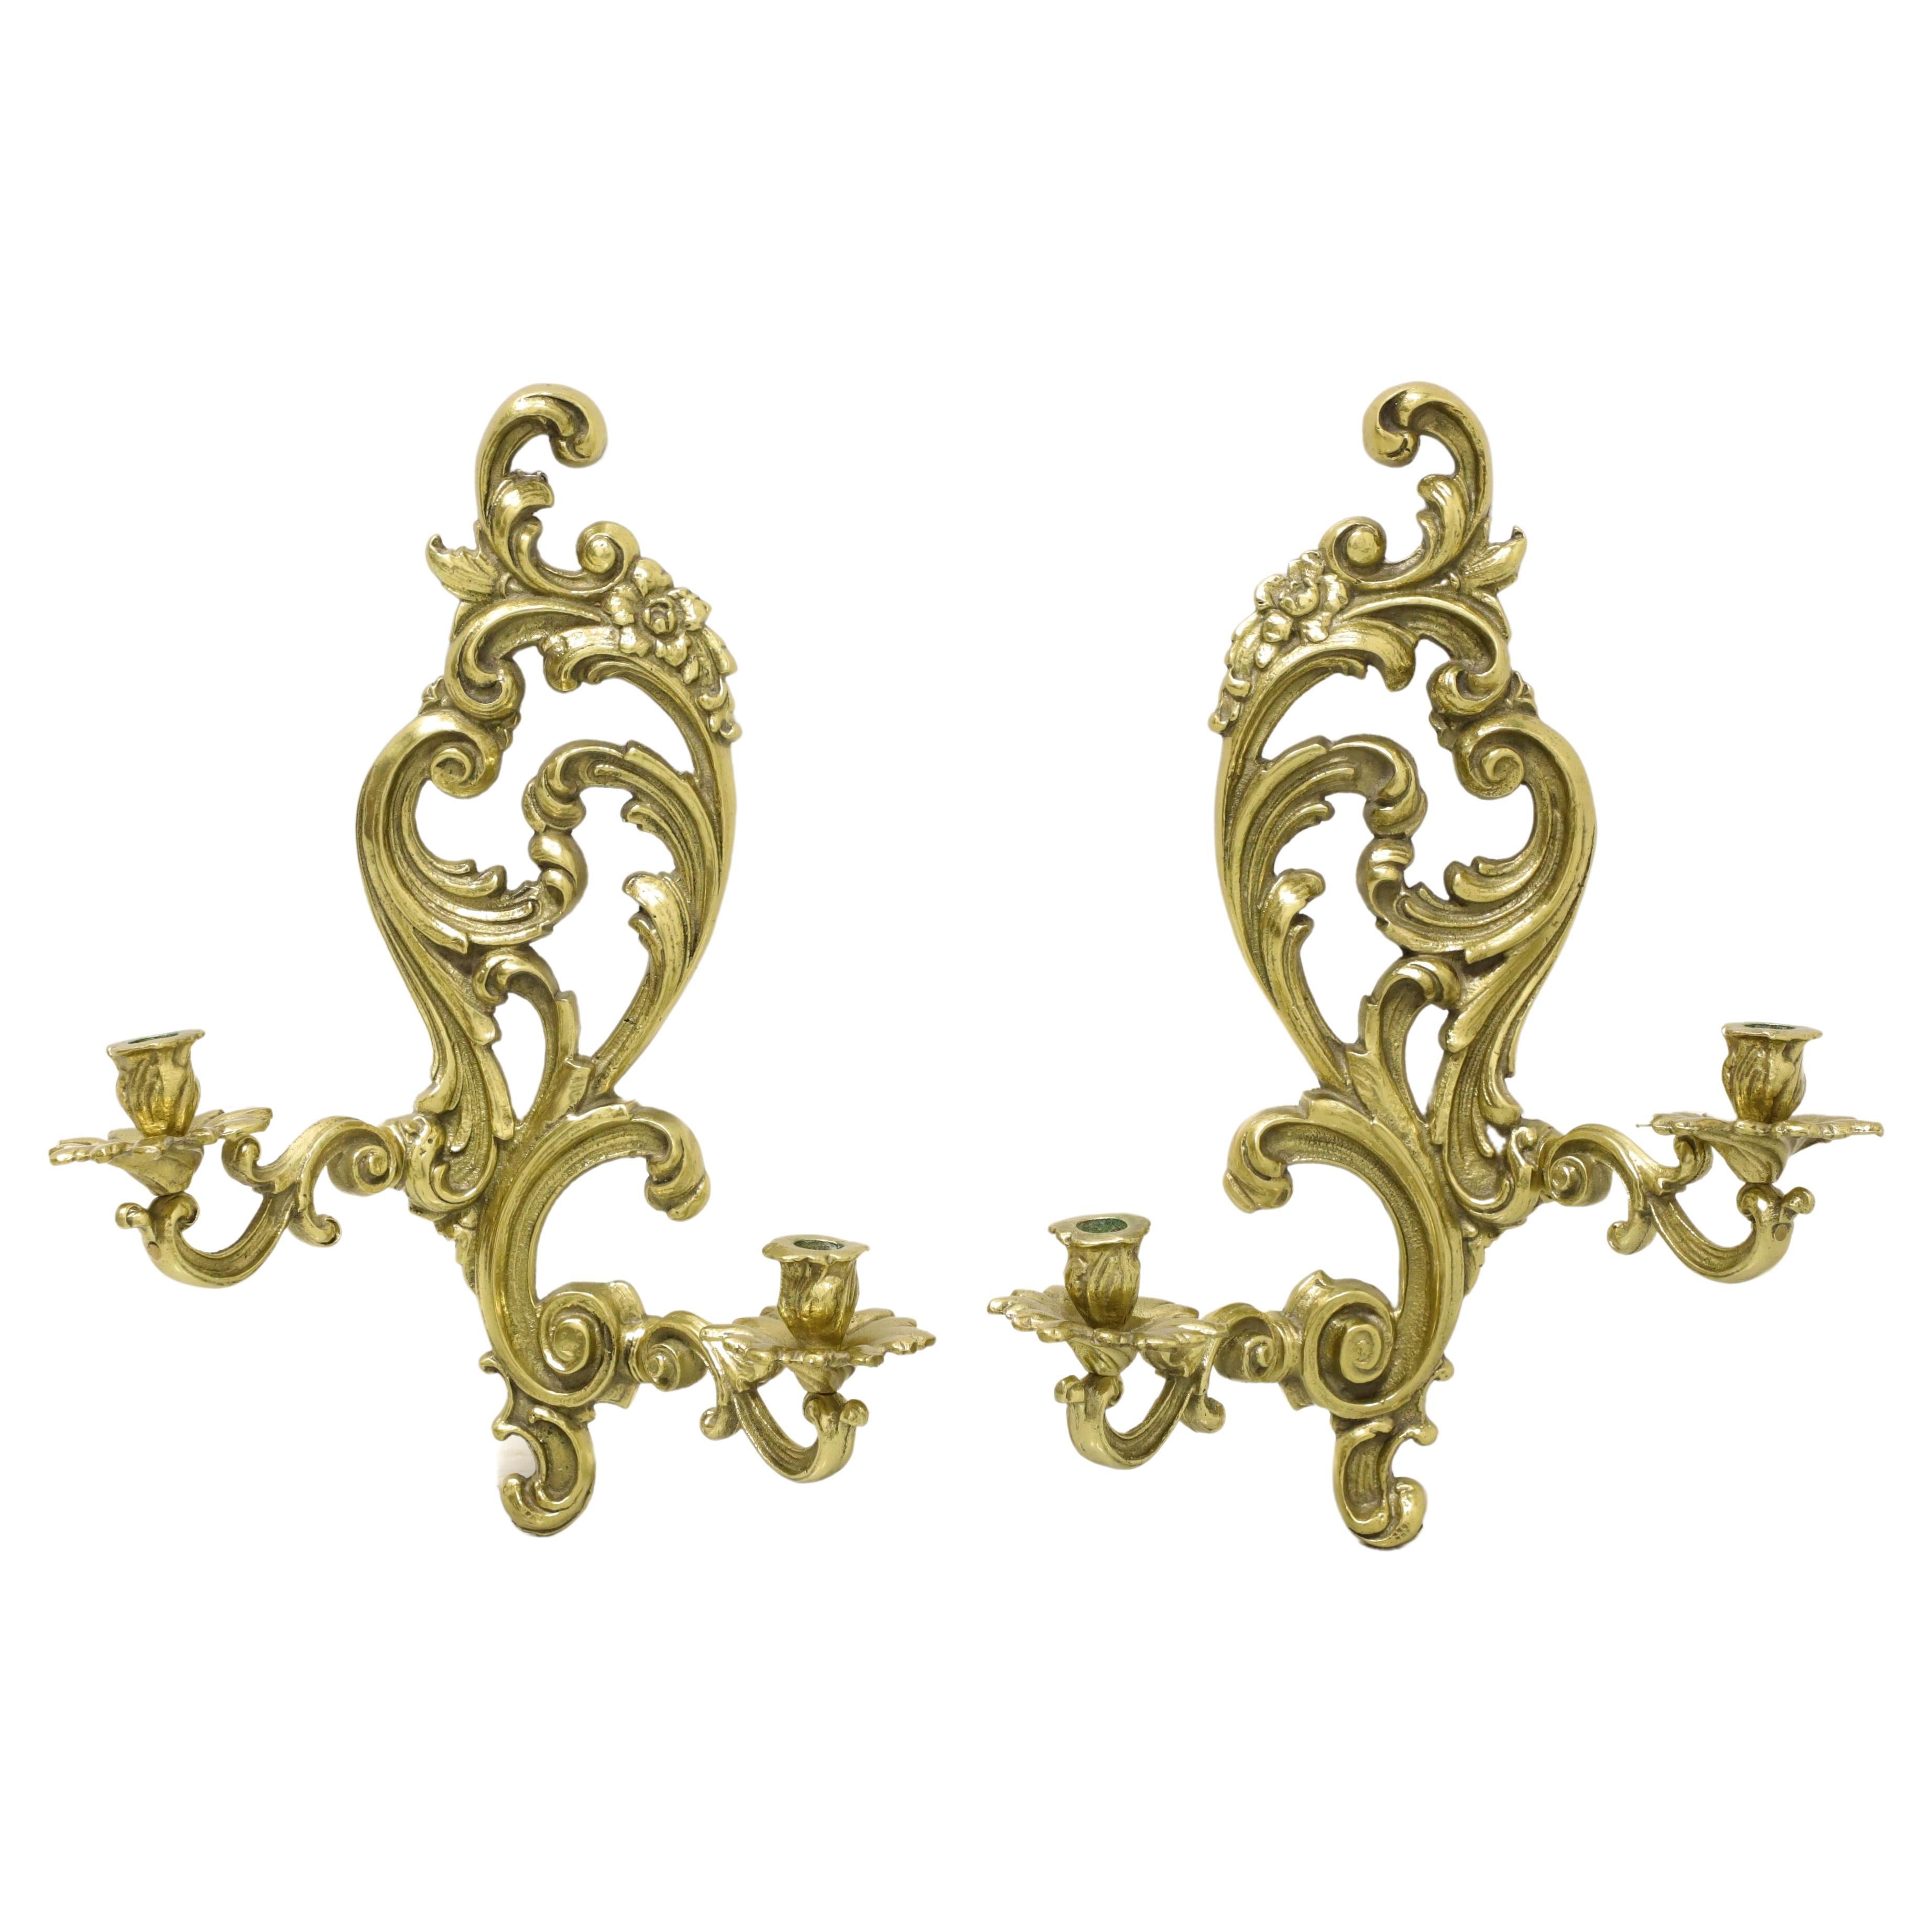 Antique 1920's Solid Brass Rococo Style Candle Wall Sconces - Pair